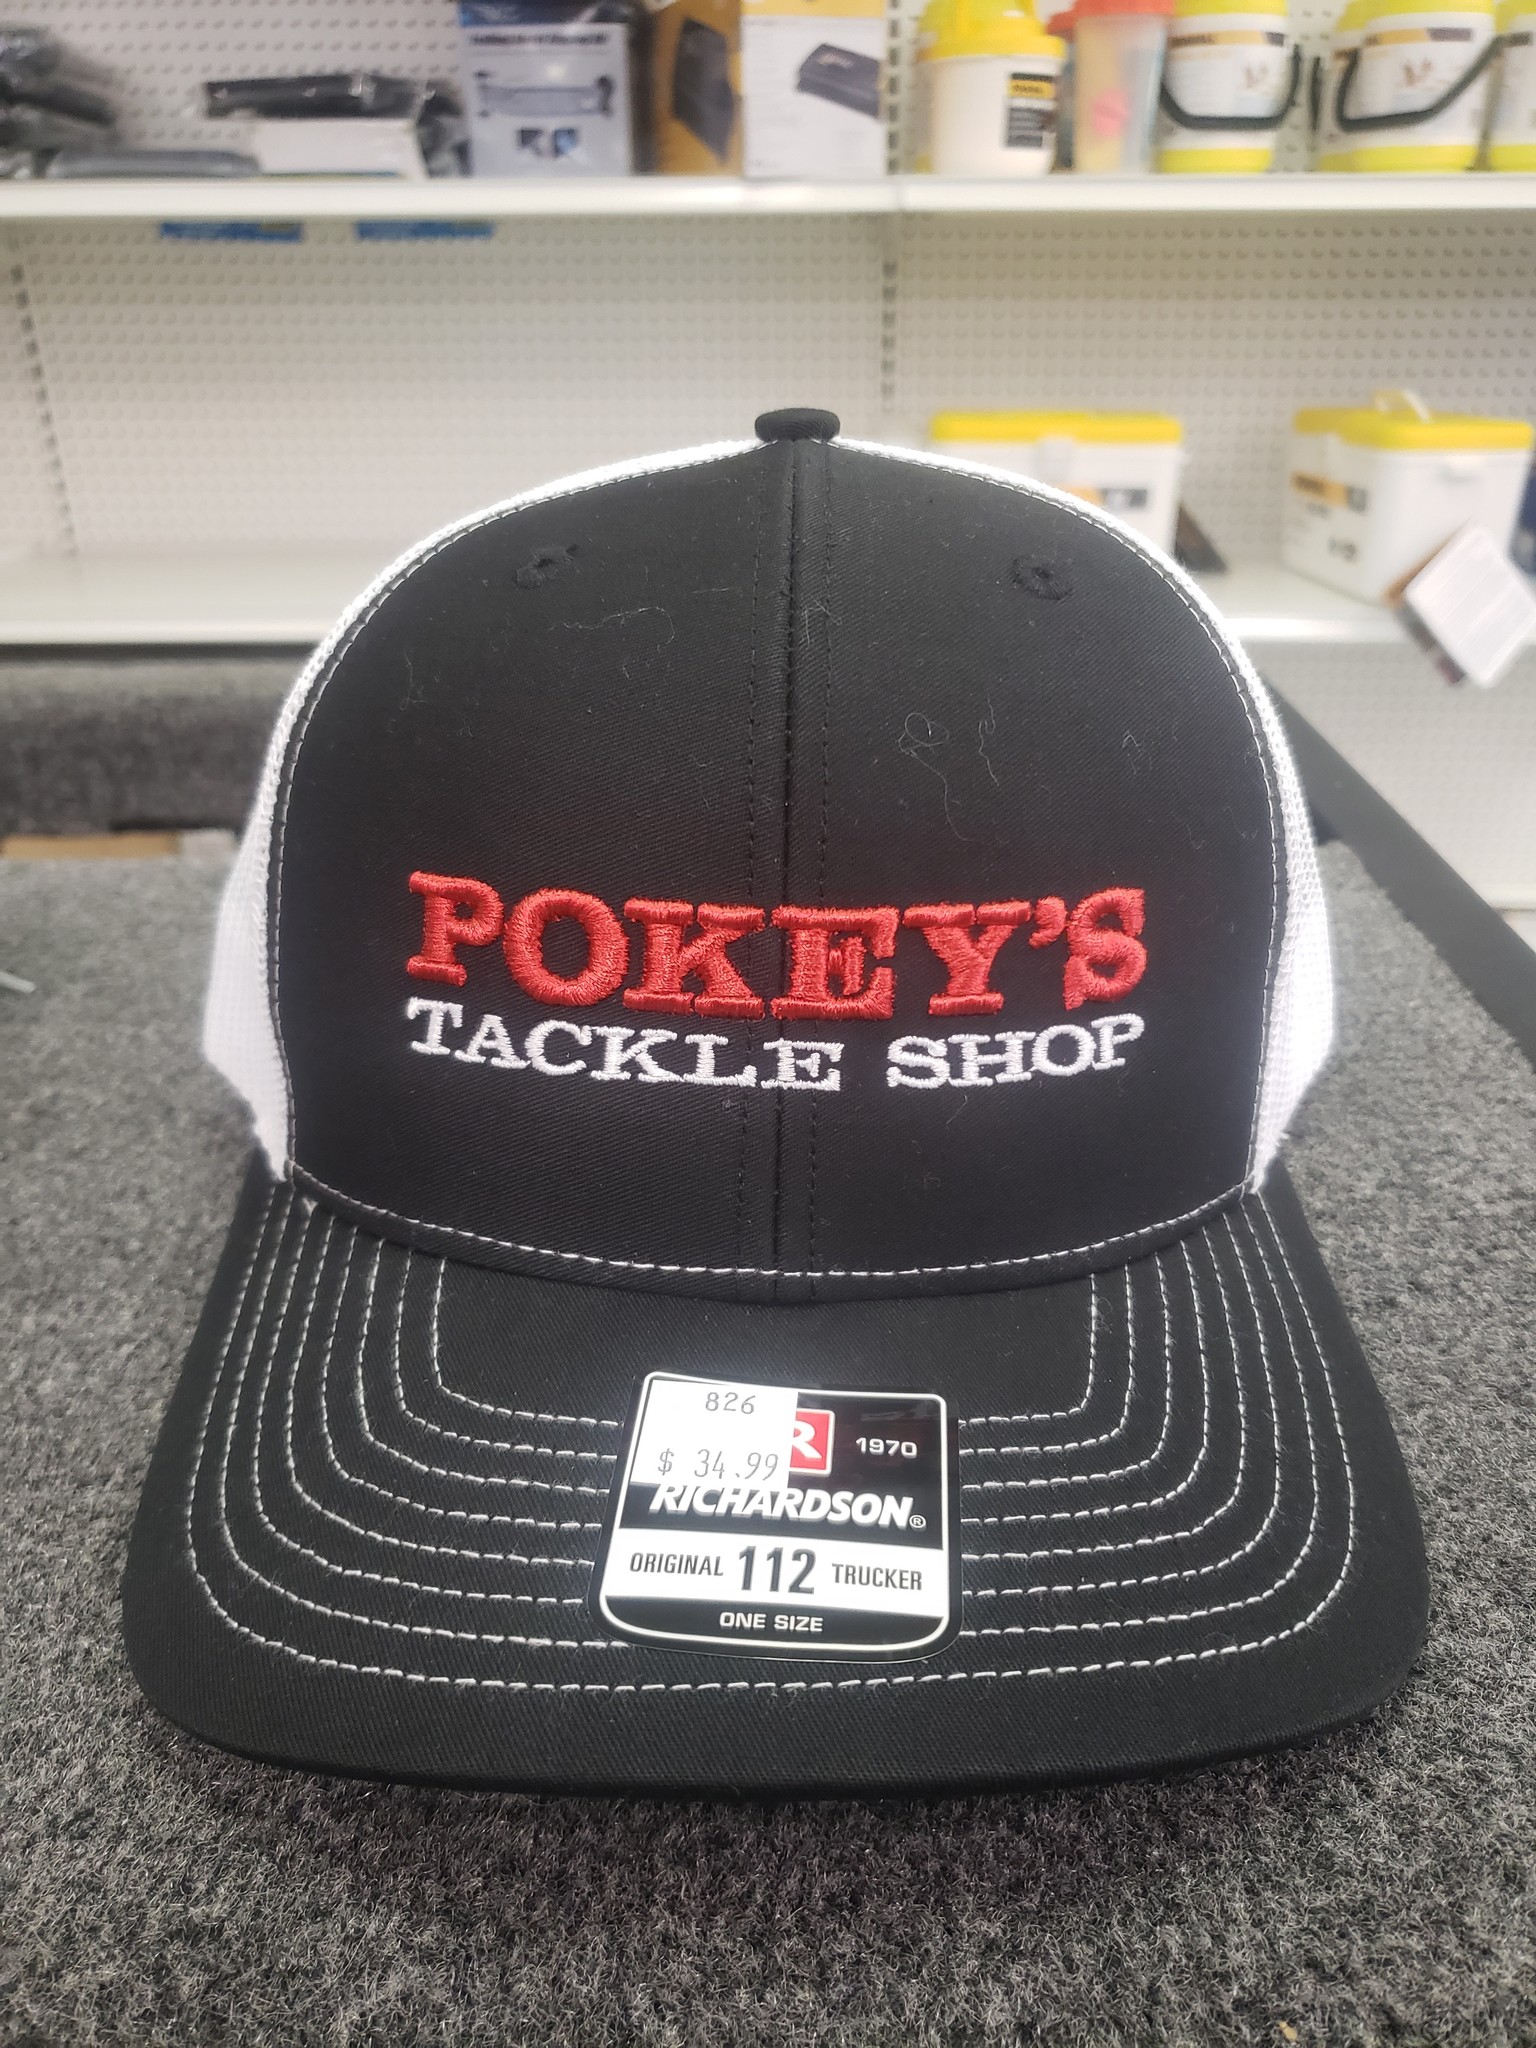 Pokey's Tackle Shop Merch – Now Available! - Pokeys Tackle Shop